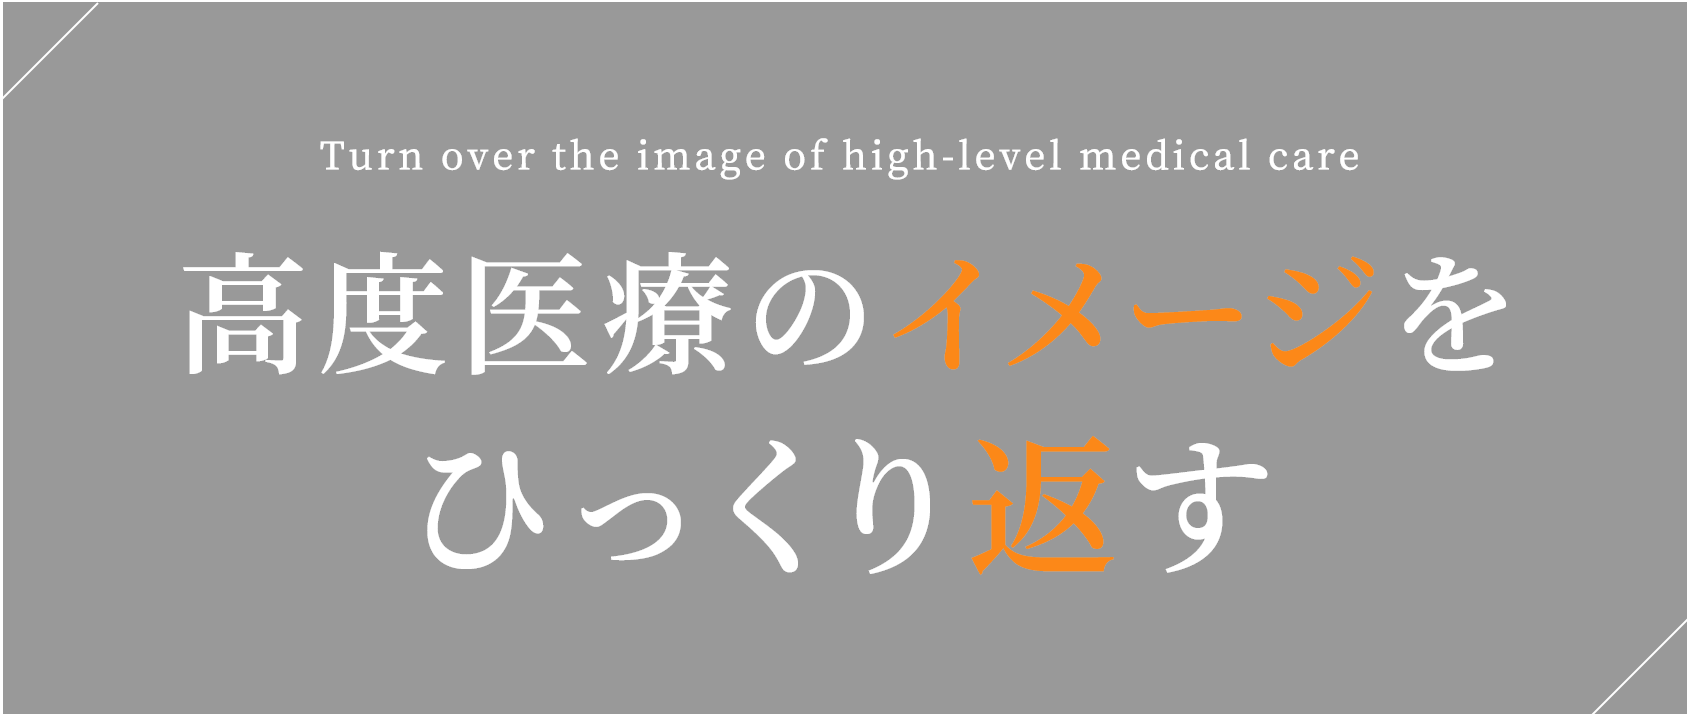 Turn over the image of high-level medical care⾼度医療のイメージをひっくり返す